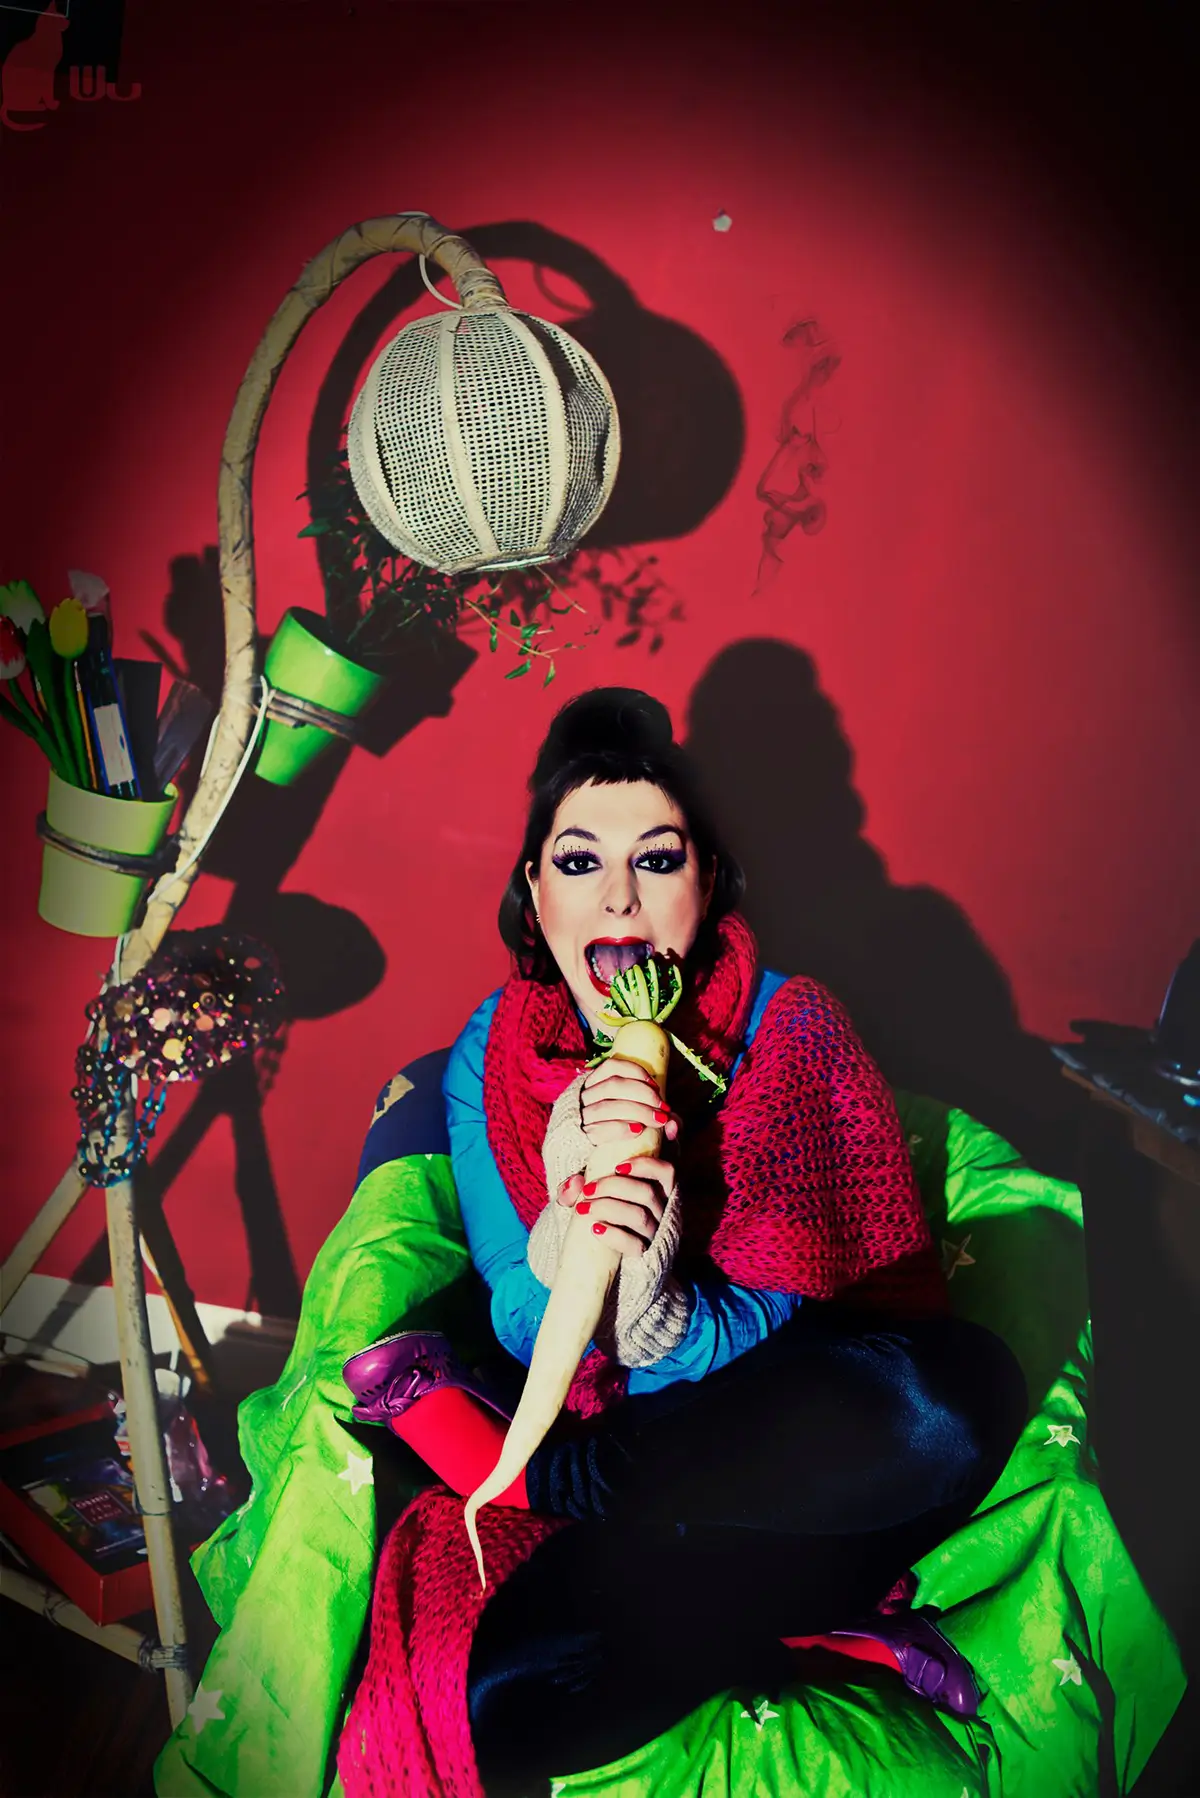 Colourful backgroud, picture of a dark-hair woman eating a large white radish. 